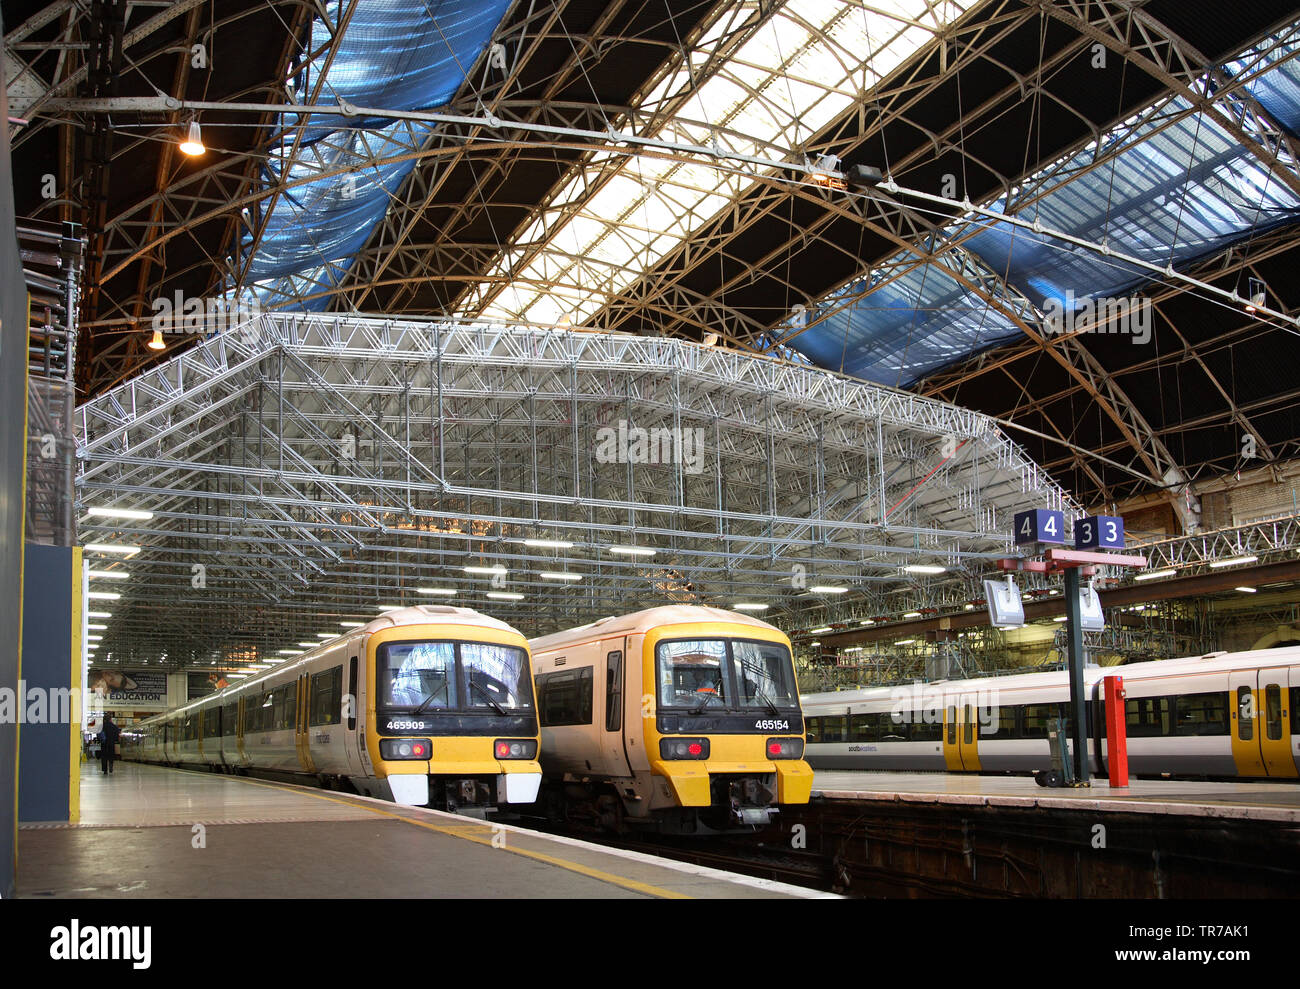 A scaffolding structure under construction spanning platforms 1 - 4 at London's Victoria Station to provide access for refurbishment of the roof. Stock Photo